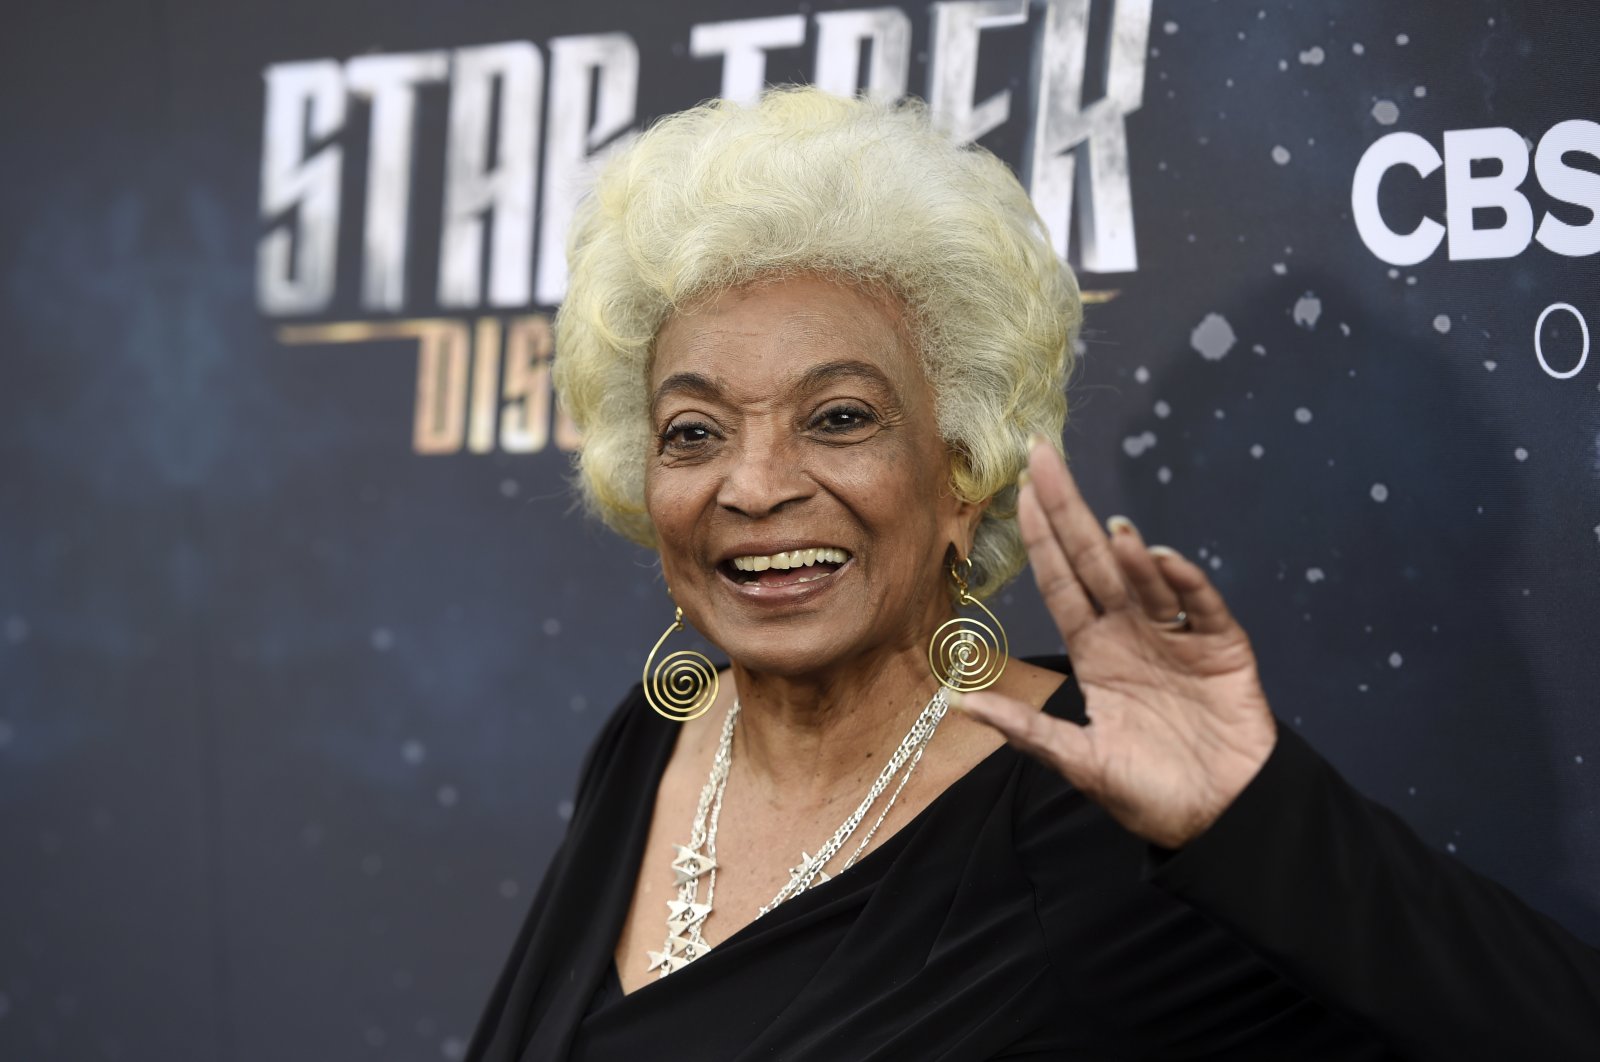 Original &quot;Star Trek&quot; cast member Nichelle Nichols, who played Lt. Ntoya Uhura on the television series, poses at the premiere of the new television series &quot;Star Trek: Discovery,&quot; Los Angeles, U.S., Sept. 19, 2017. (AP Photo)